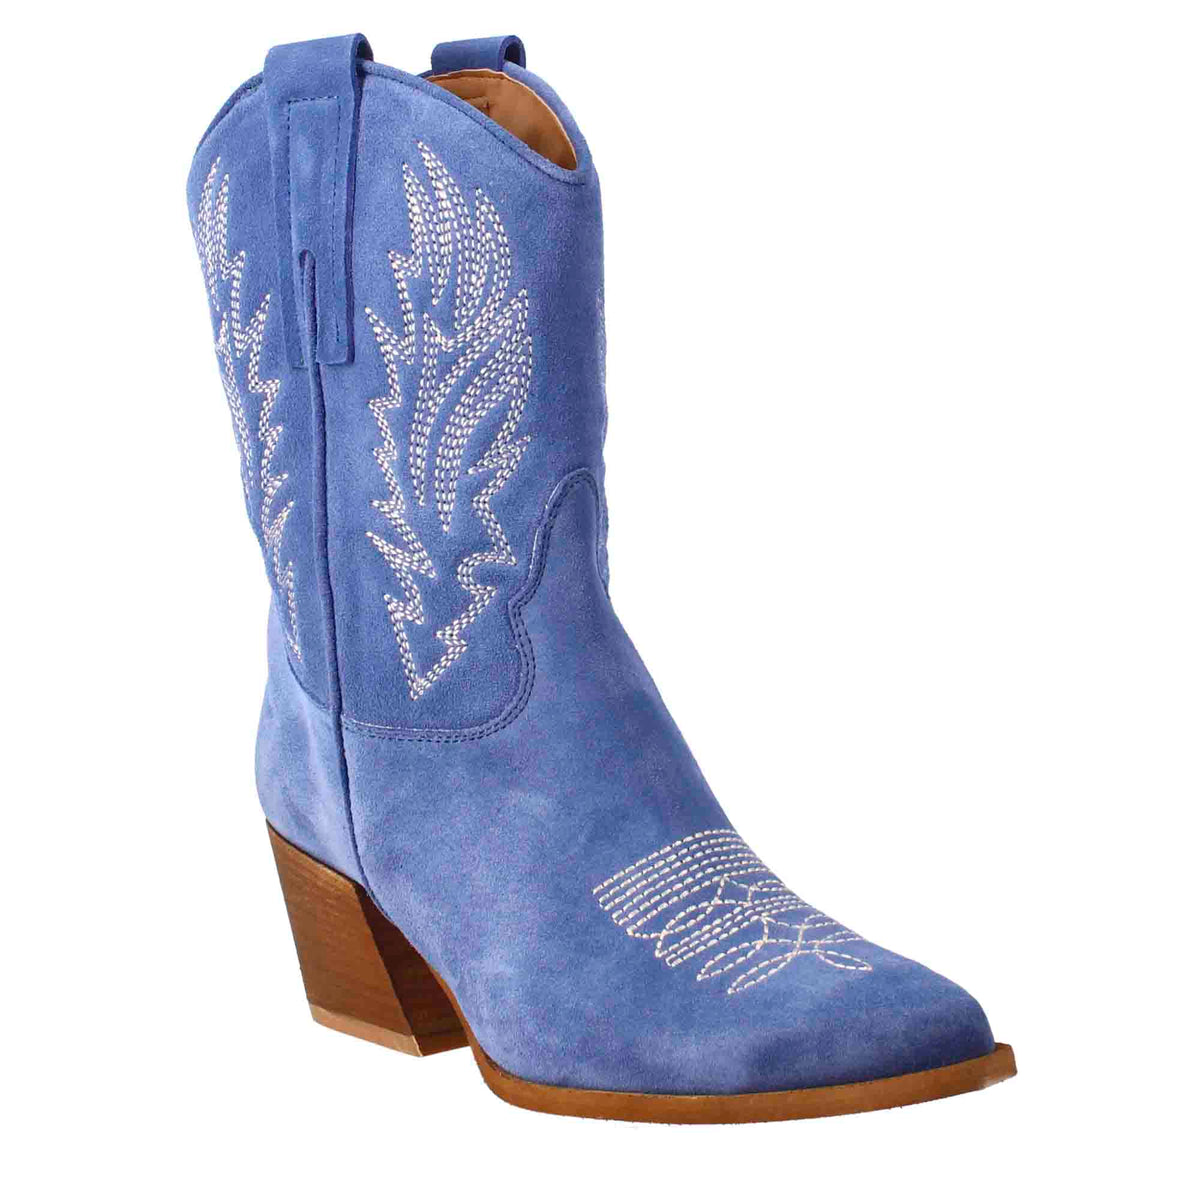 Texan women's ankle boot in light blue suede with embroidery.